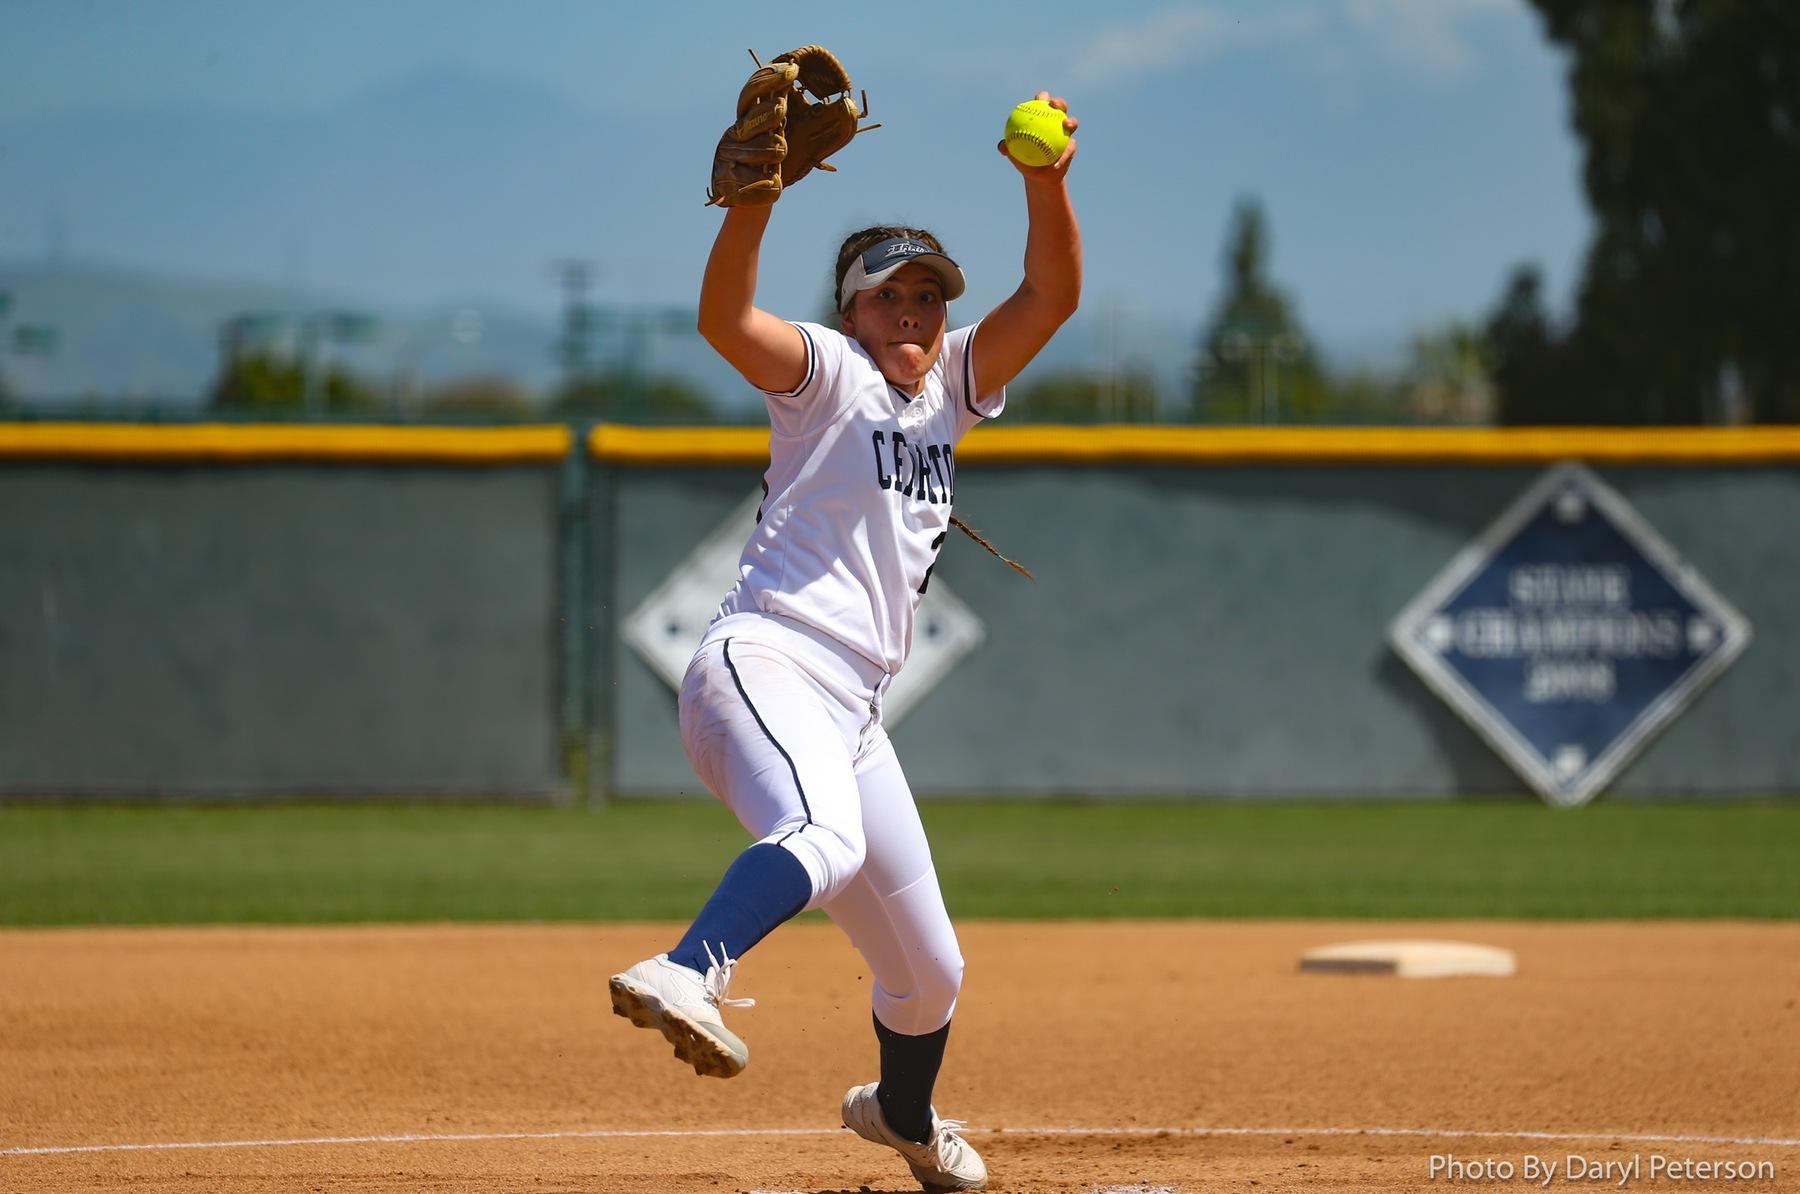 File Photo: Sierra Gerdts pitched a complete game against El Camino